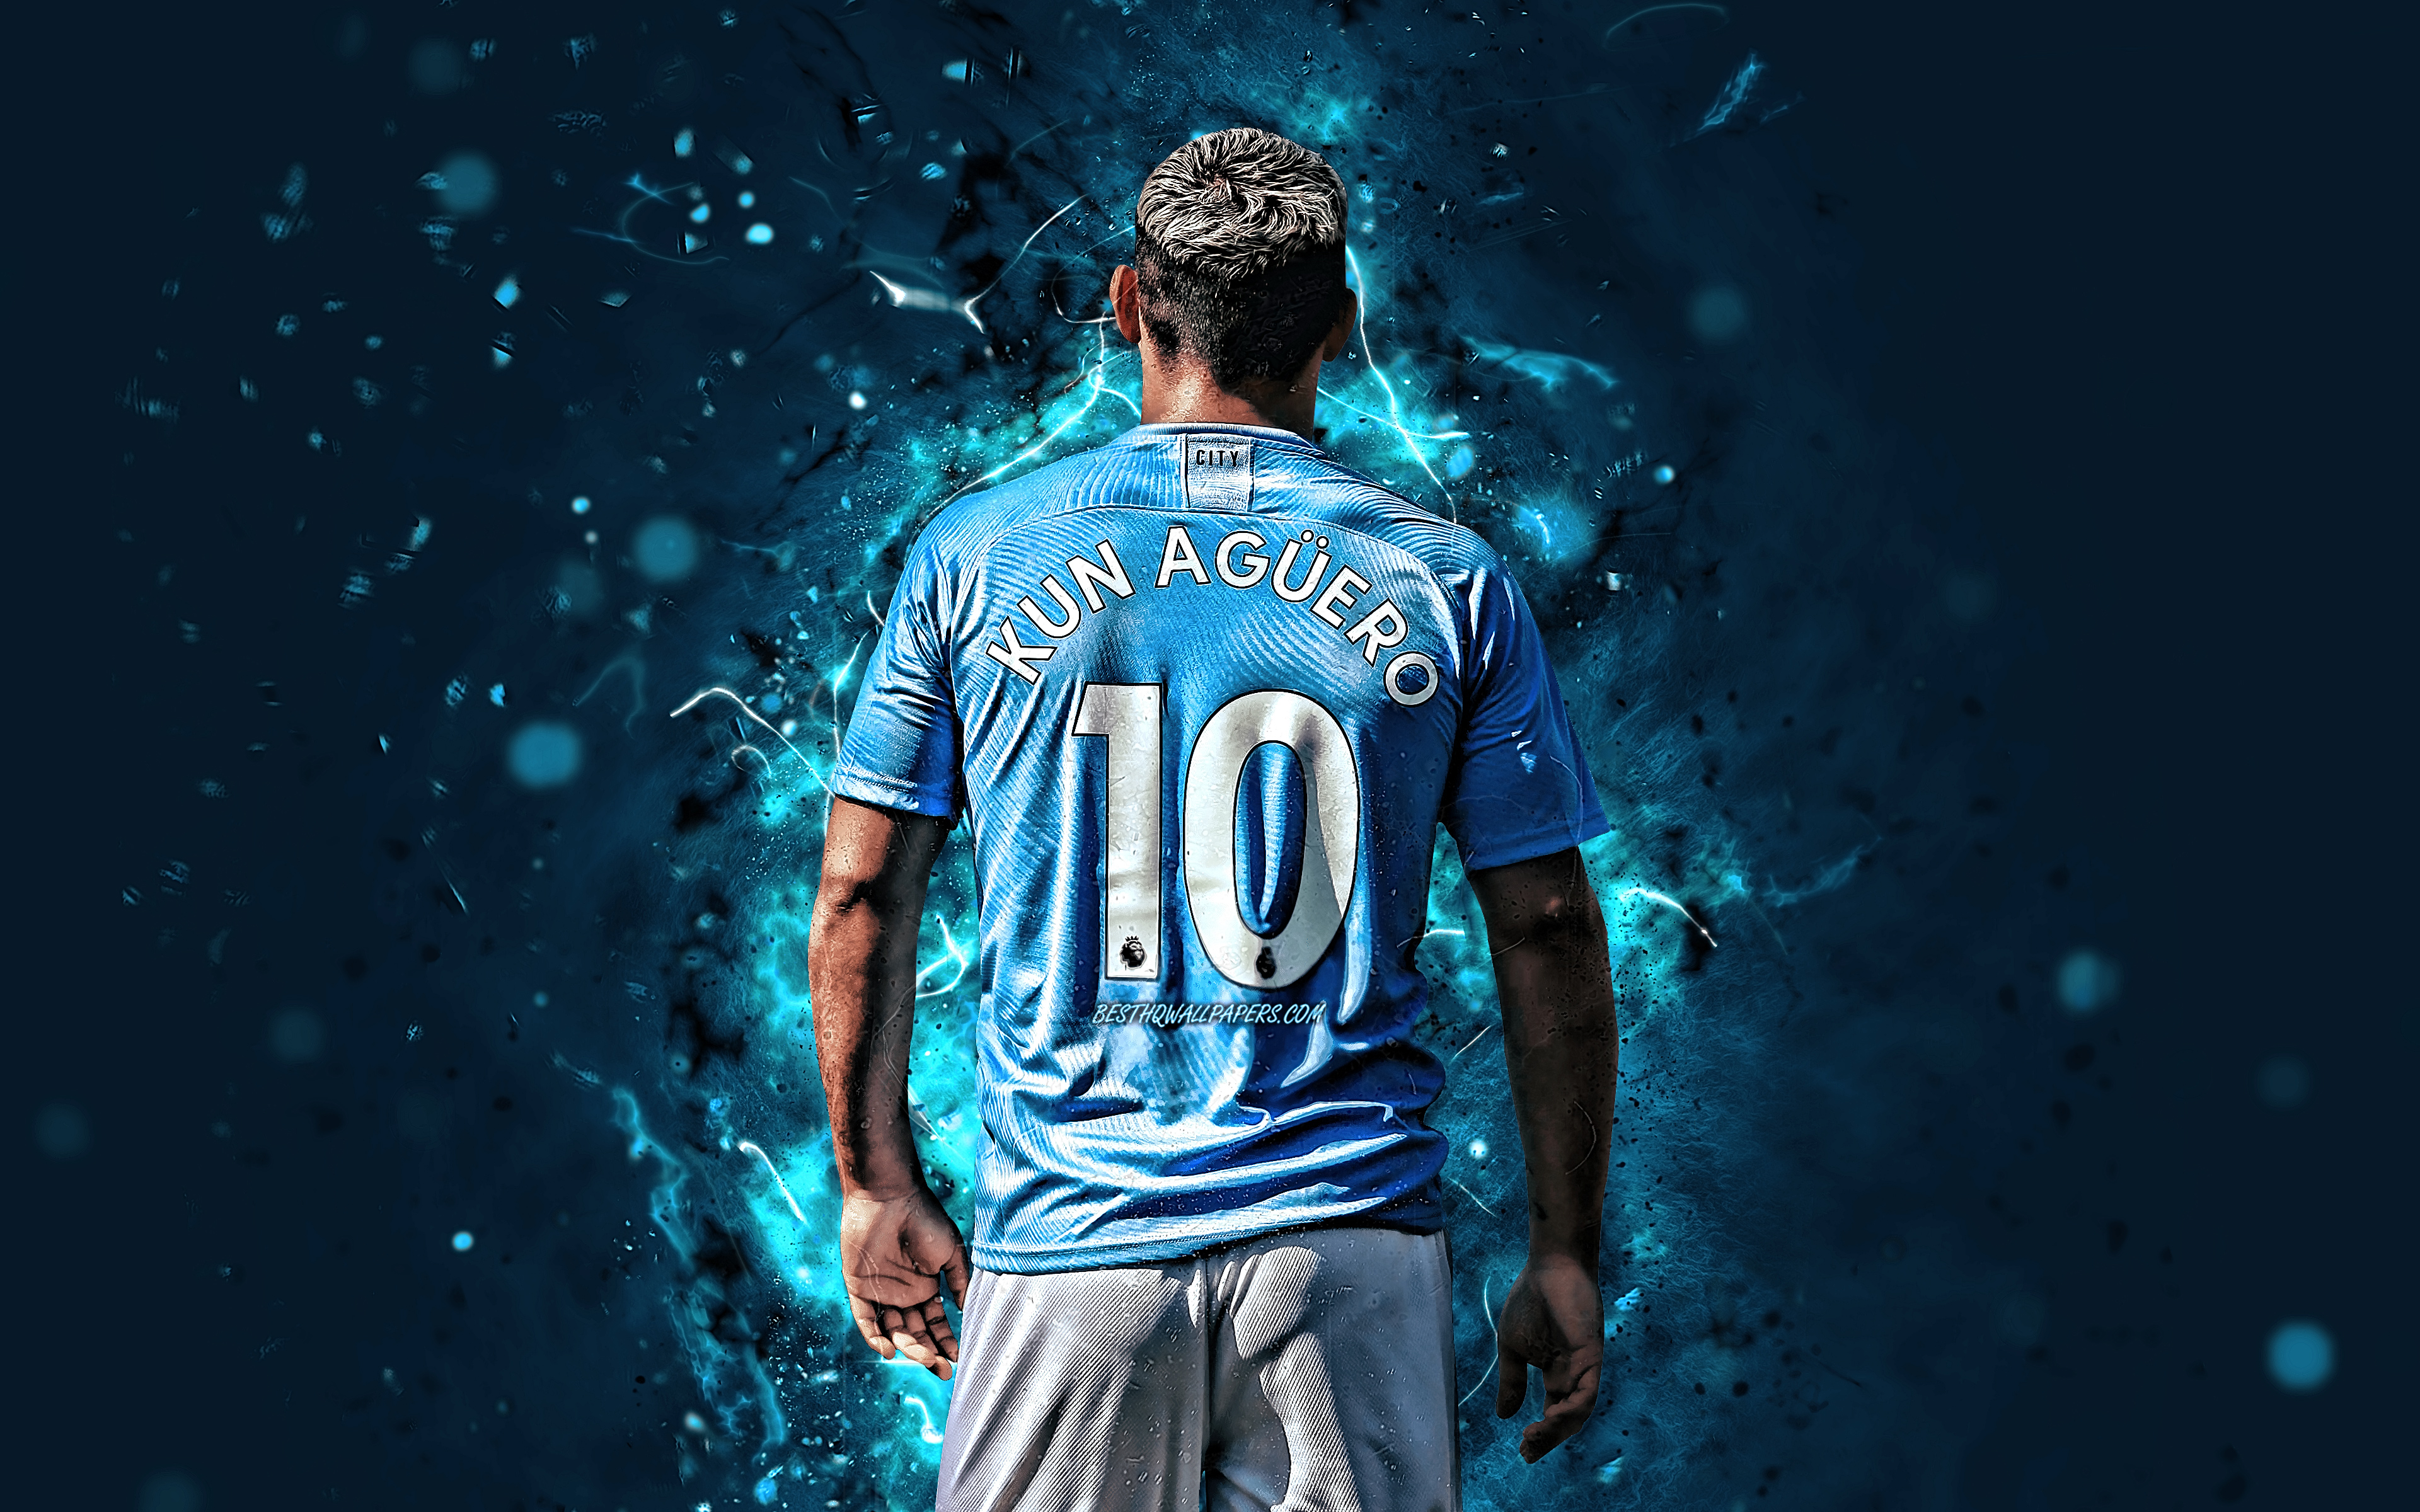 Sergio Aguero Wallpapers 69 pictures